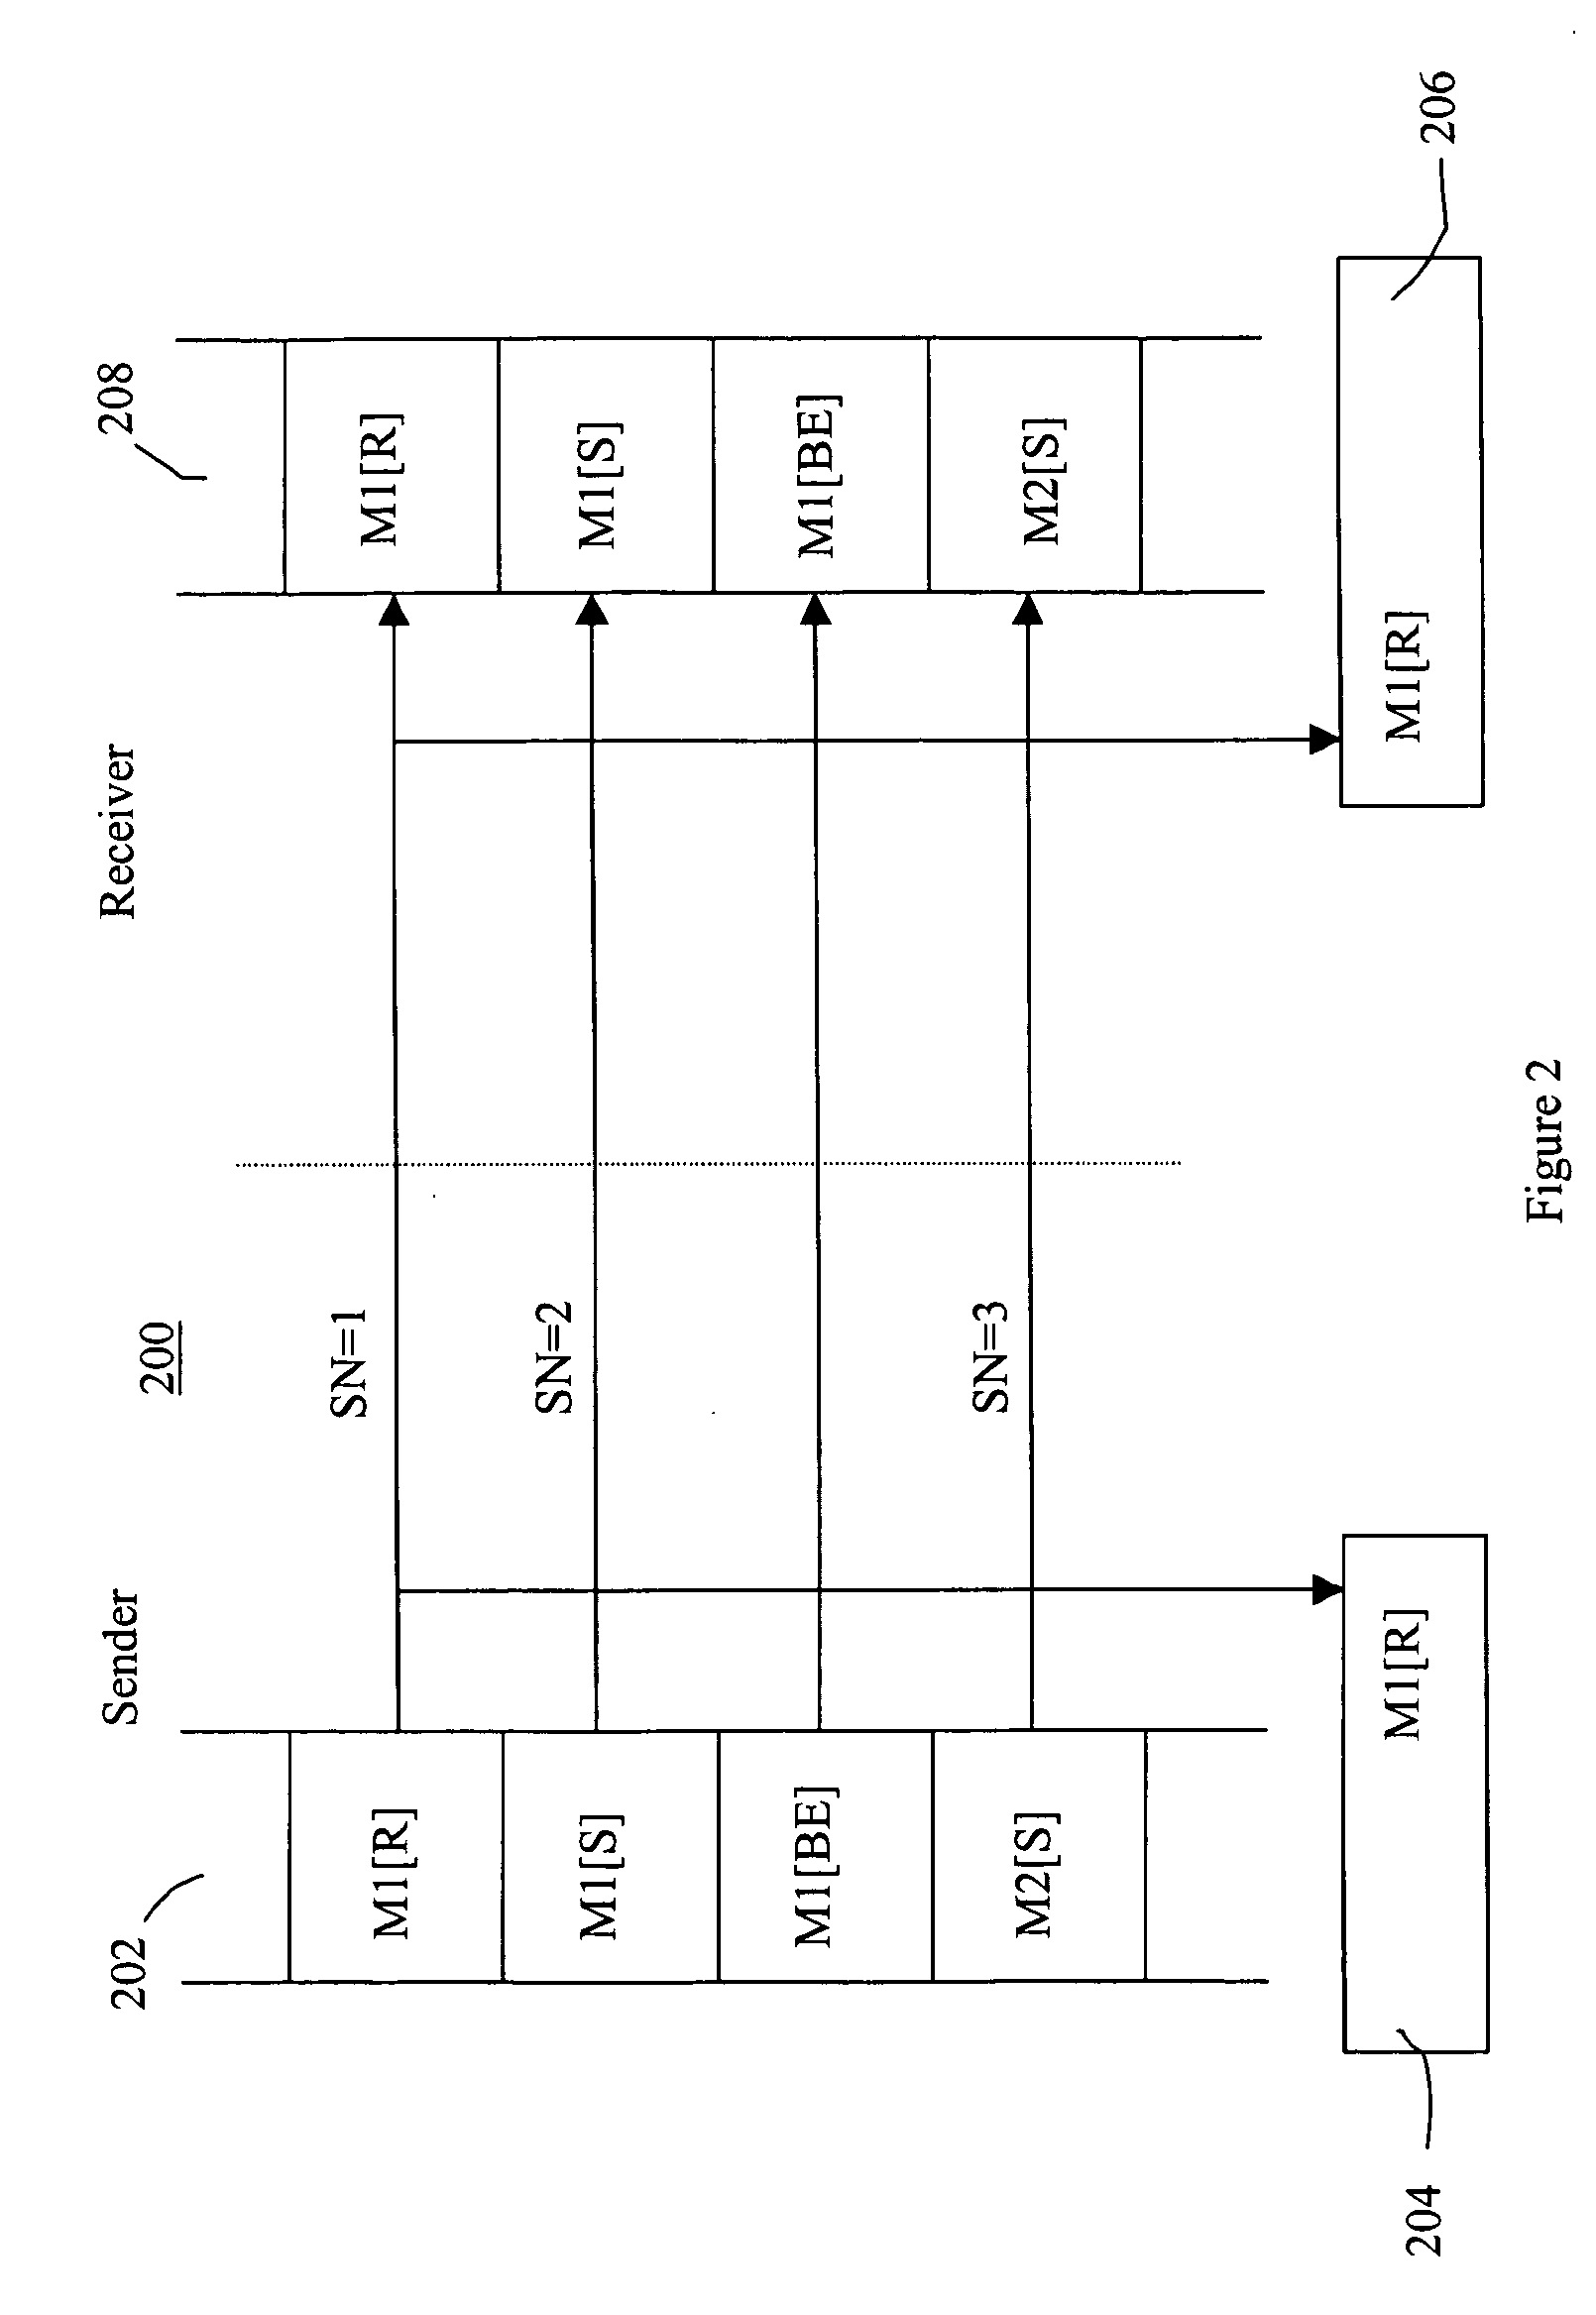 System and method for providing various levels of reliable messaging between a client and a server